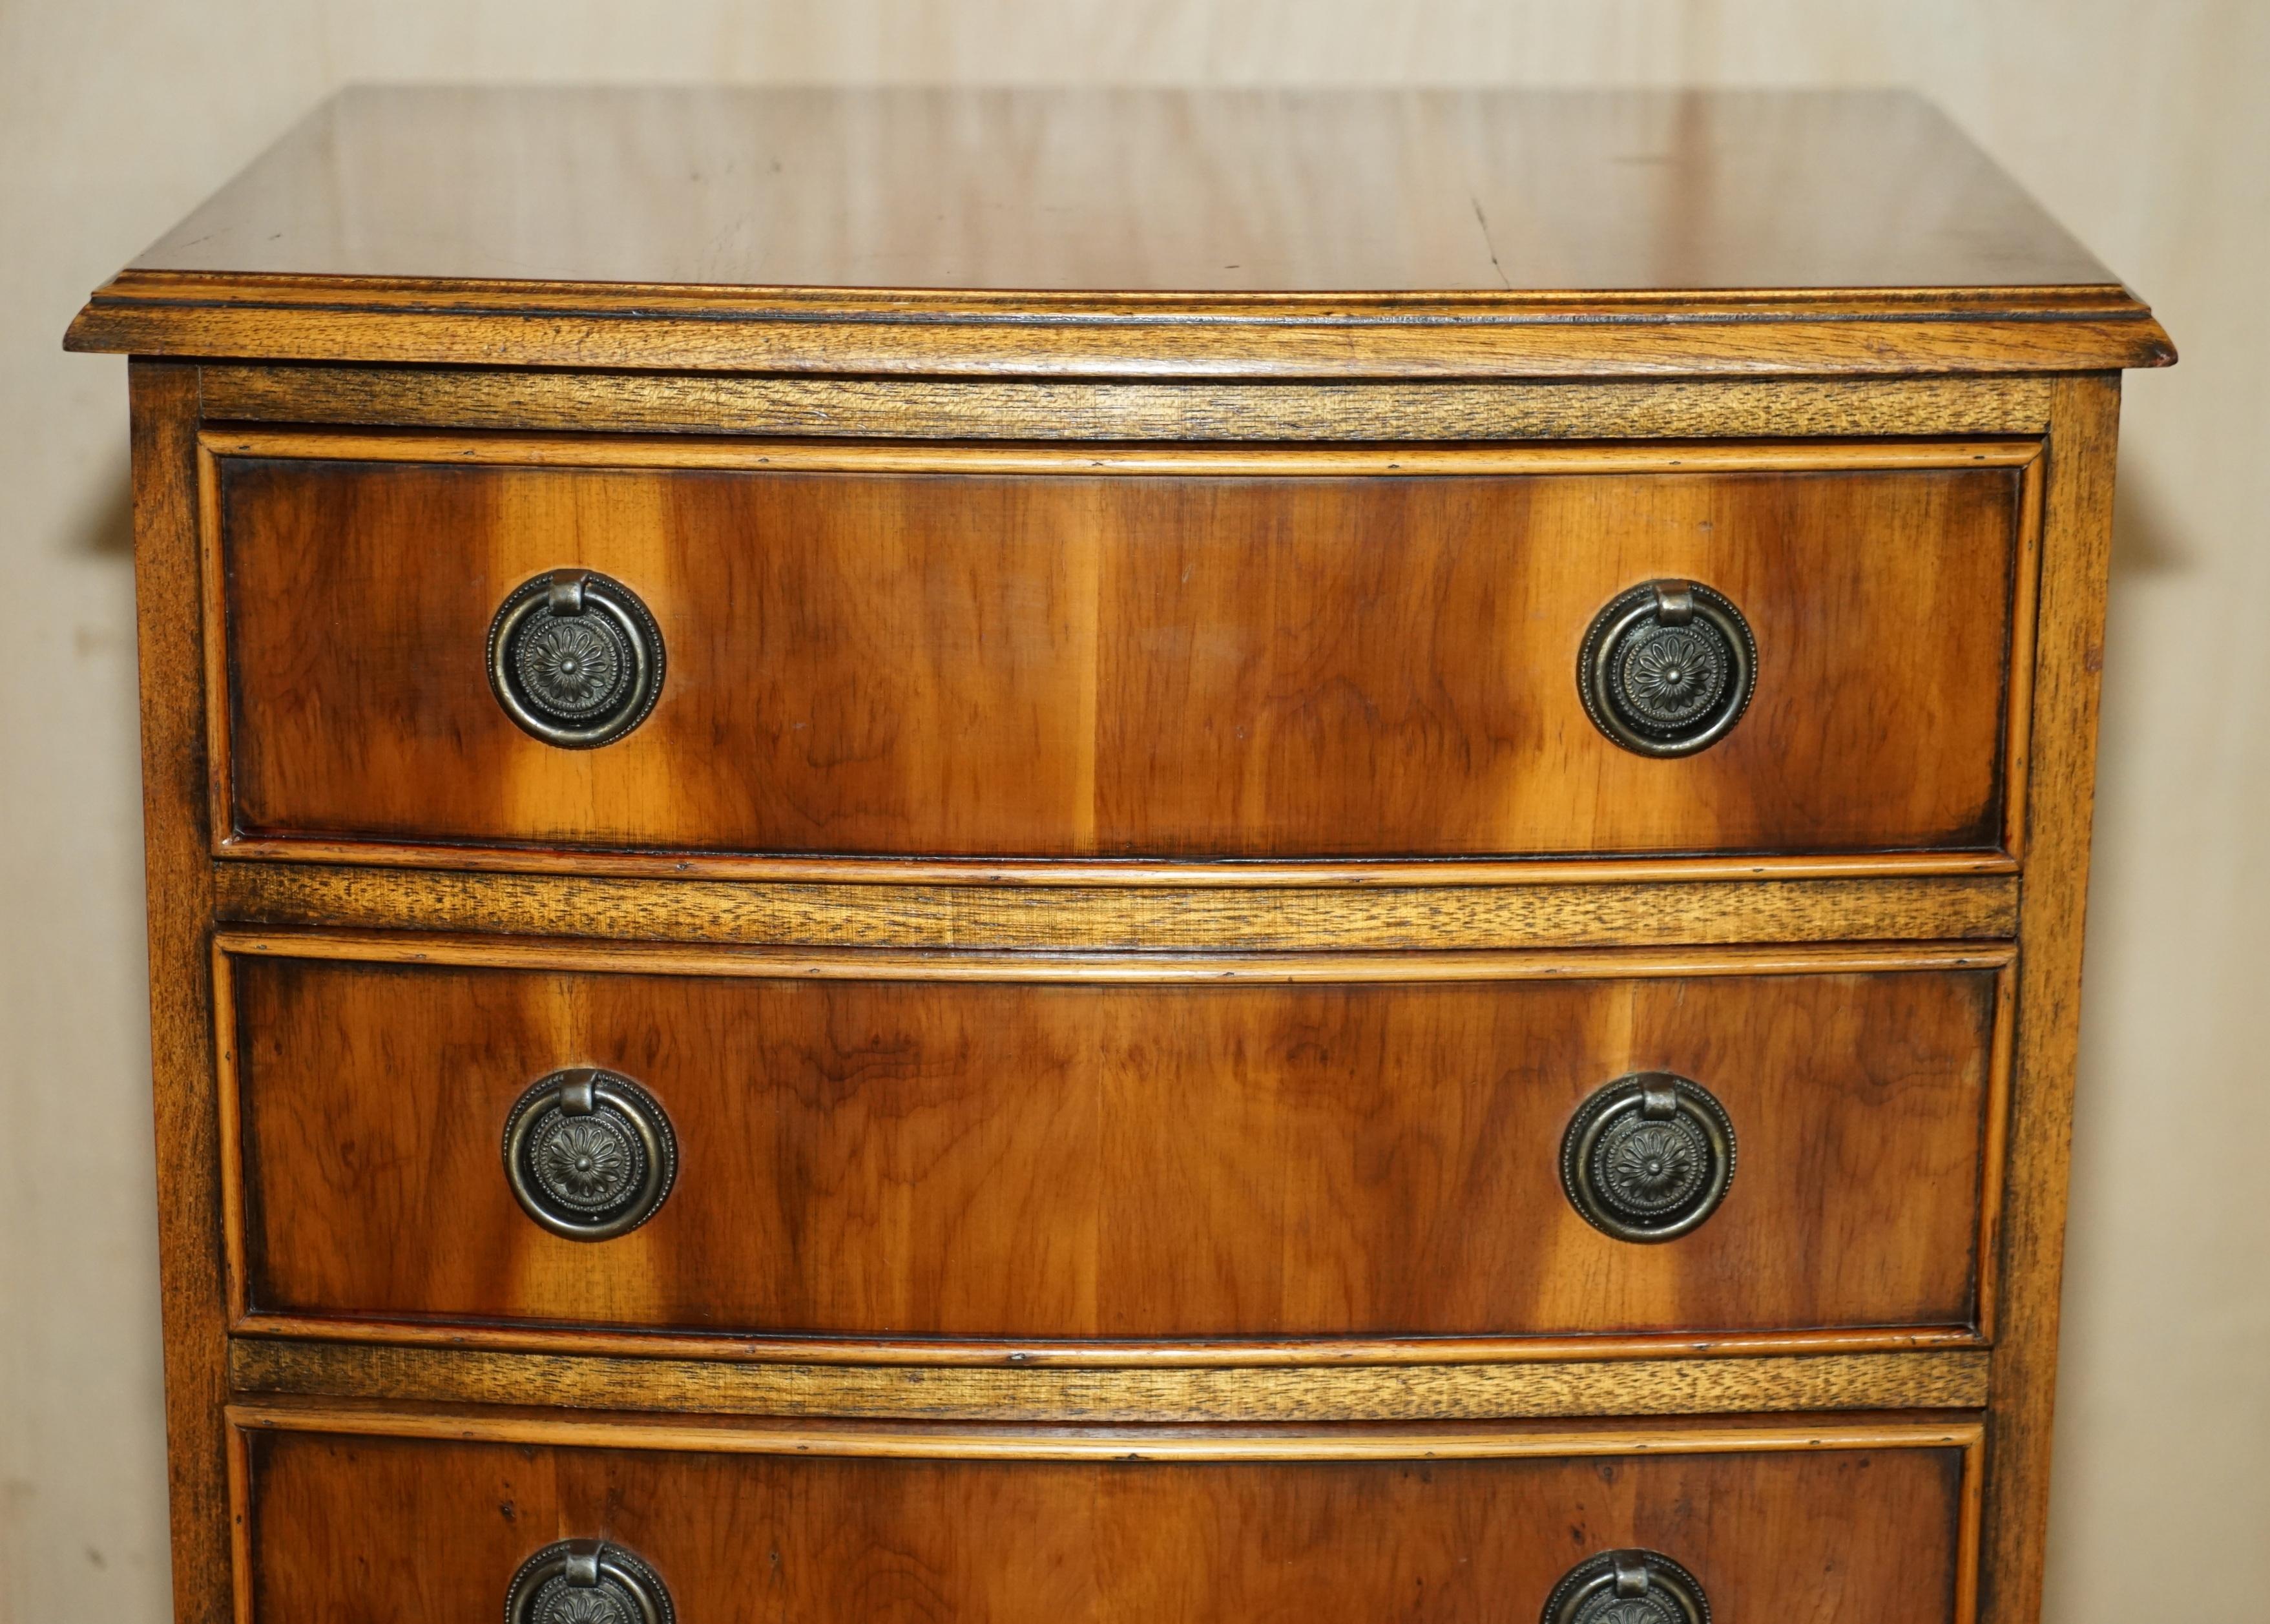 CIRCA 1940's BURR YEW WOOD BOW FRONTED BEDSIDE SIDE TABLE CHEST OF DRAWERS For Sale 1